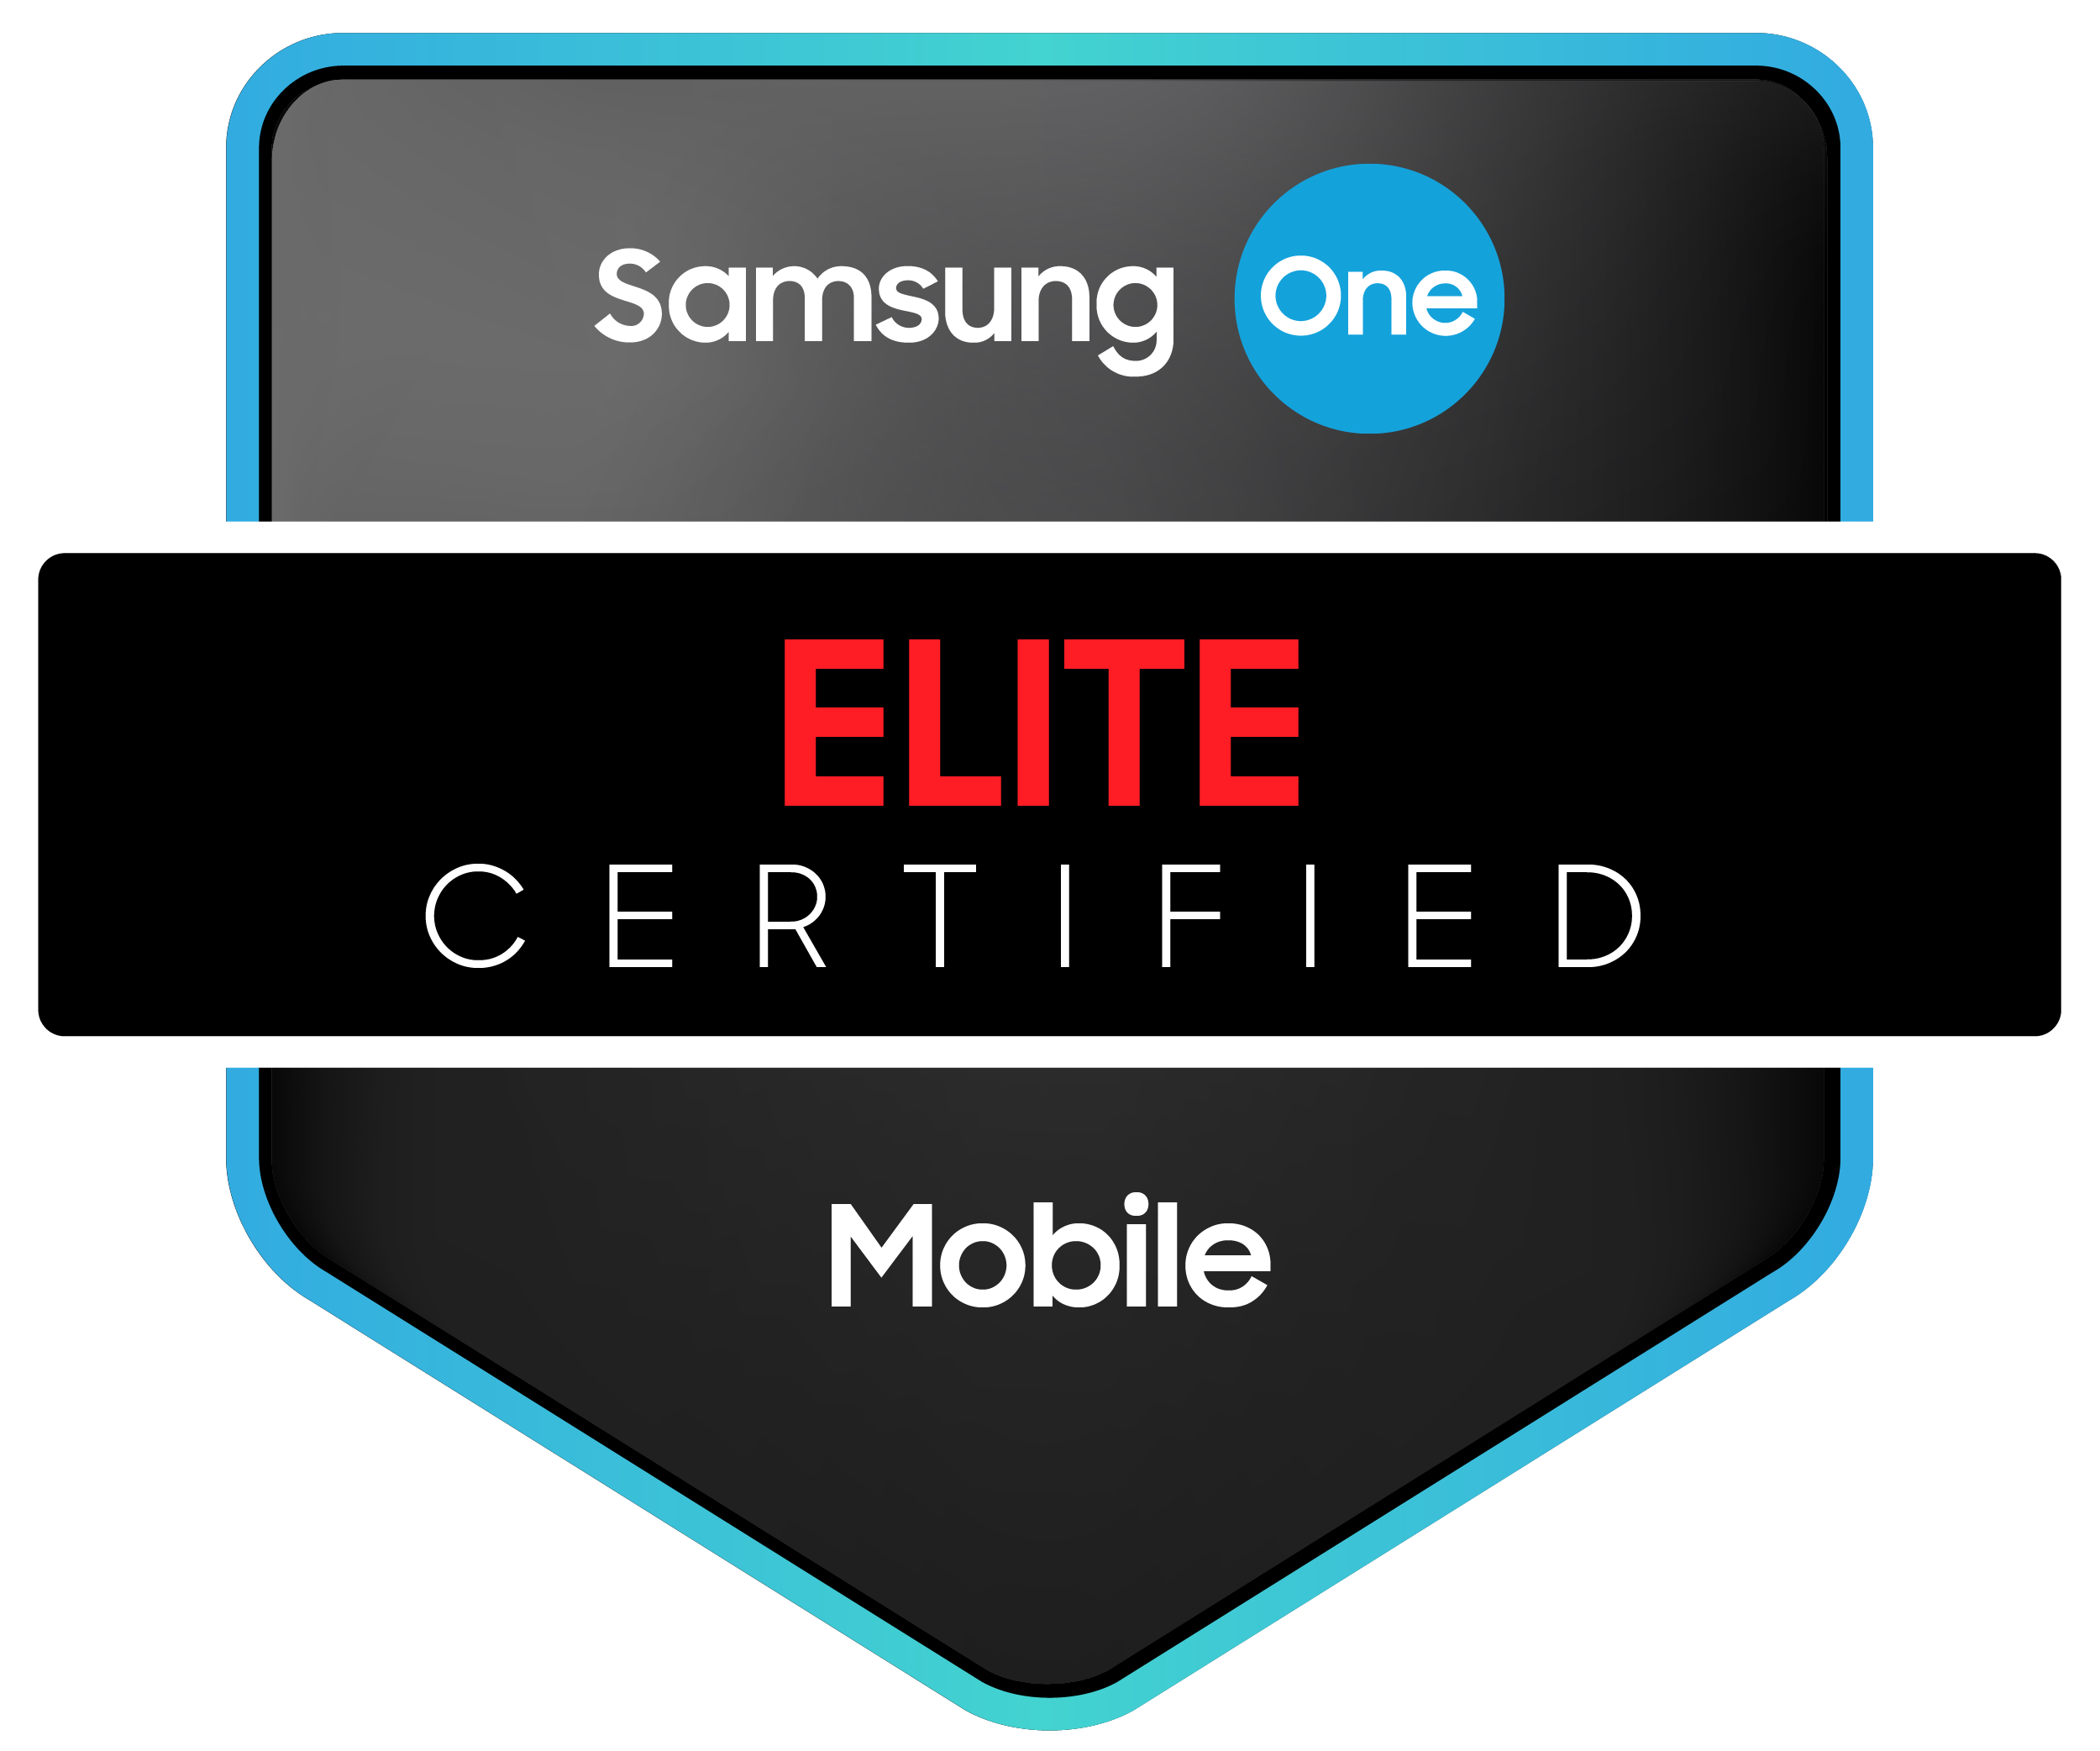 Samsung One Elite Mobile Certified